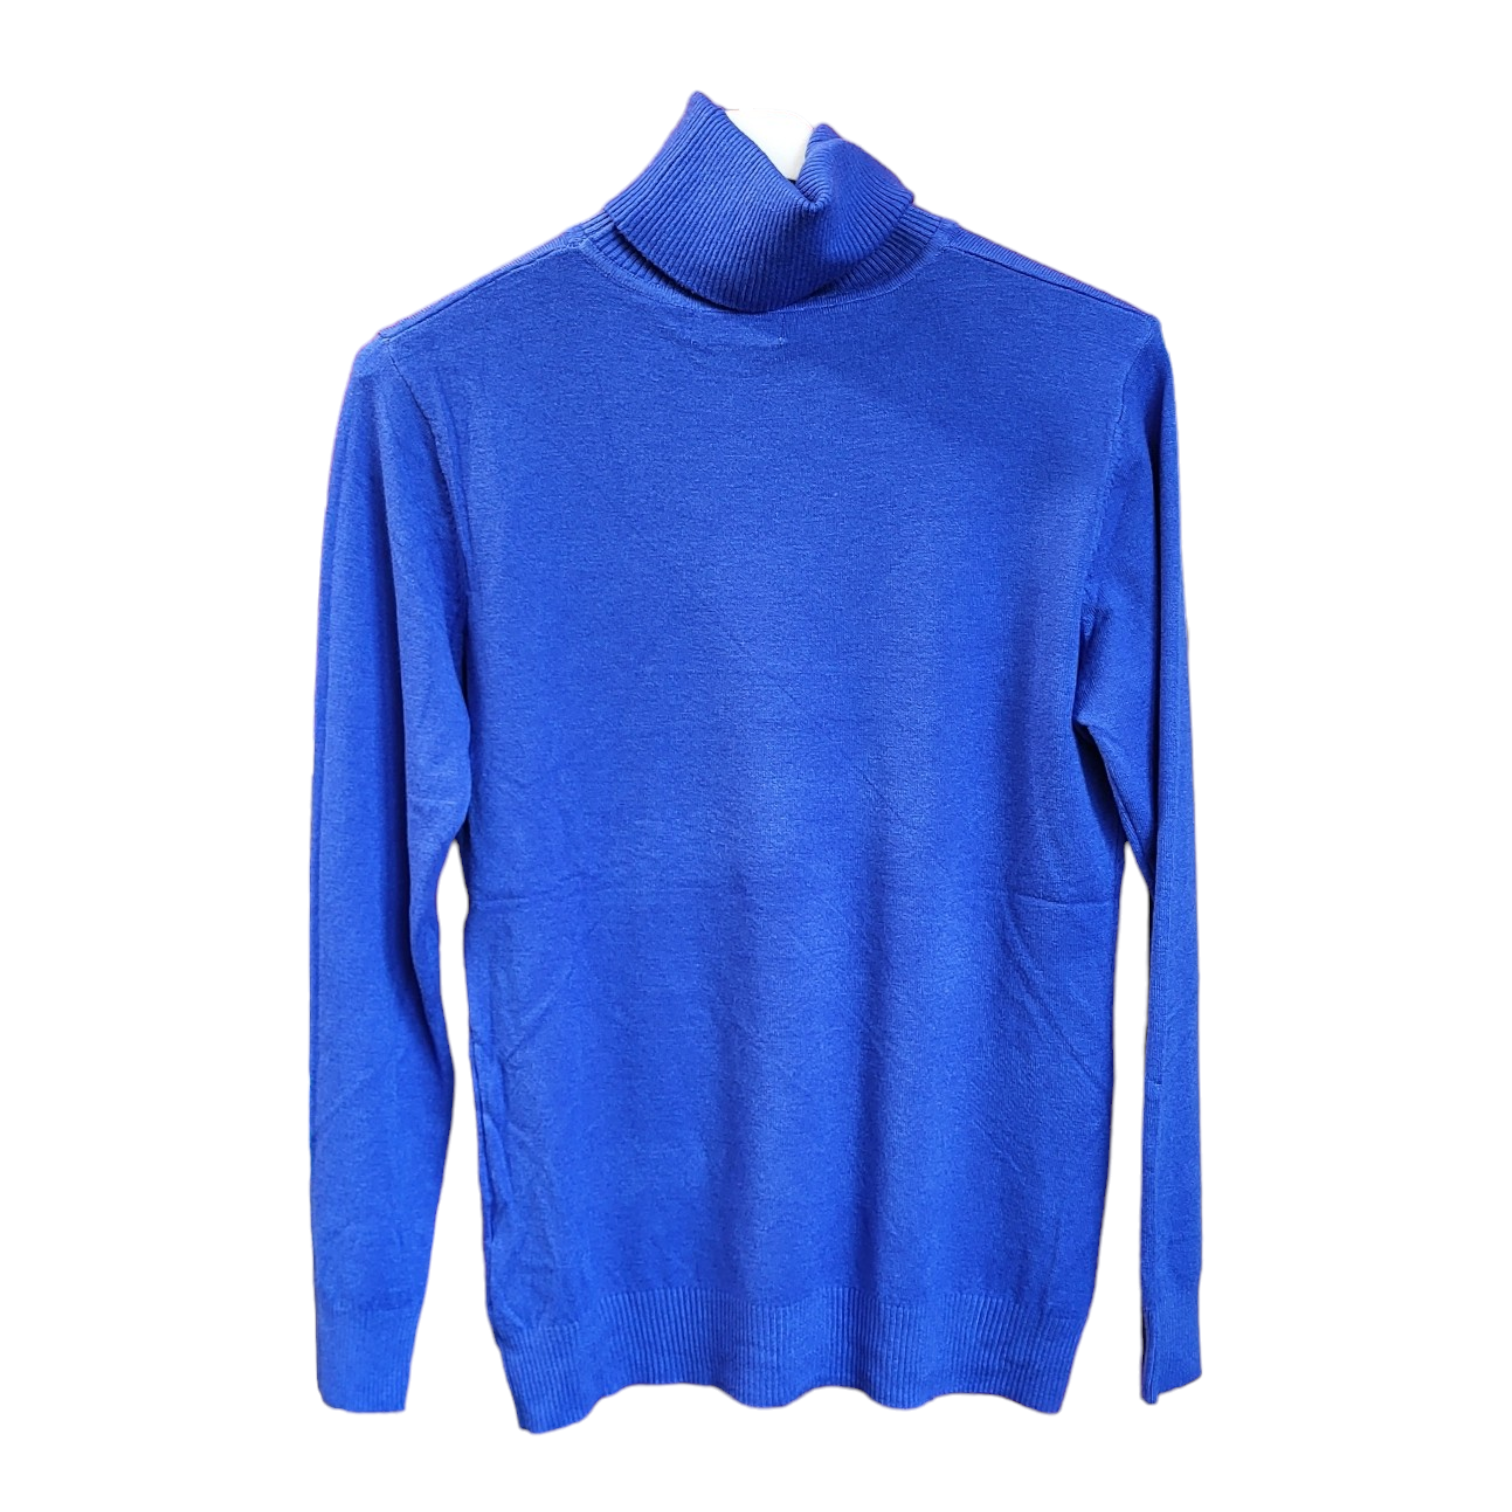 sapphire blue polo neck top with long sleeves